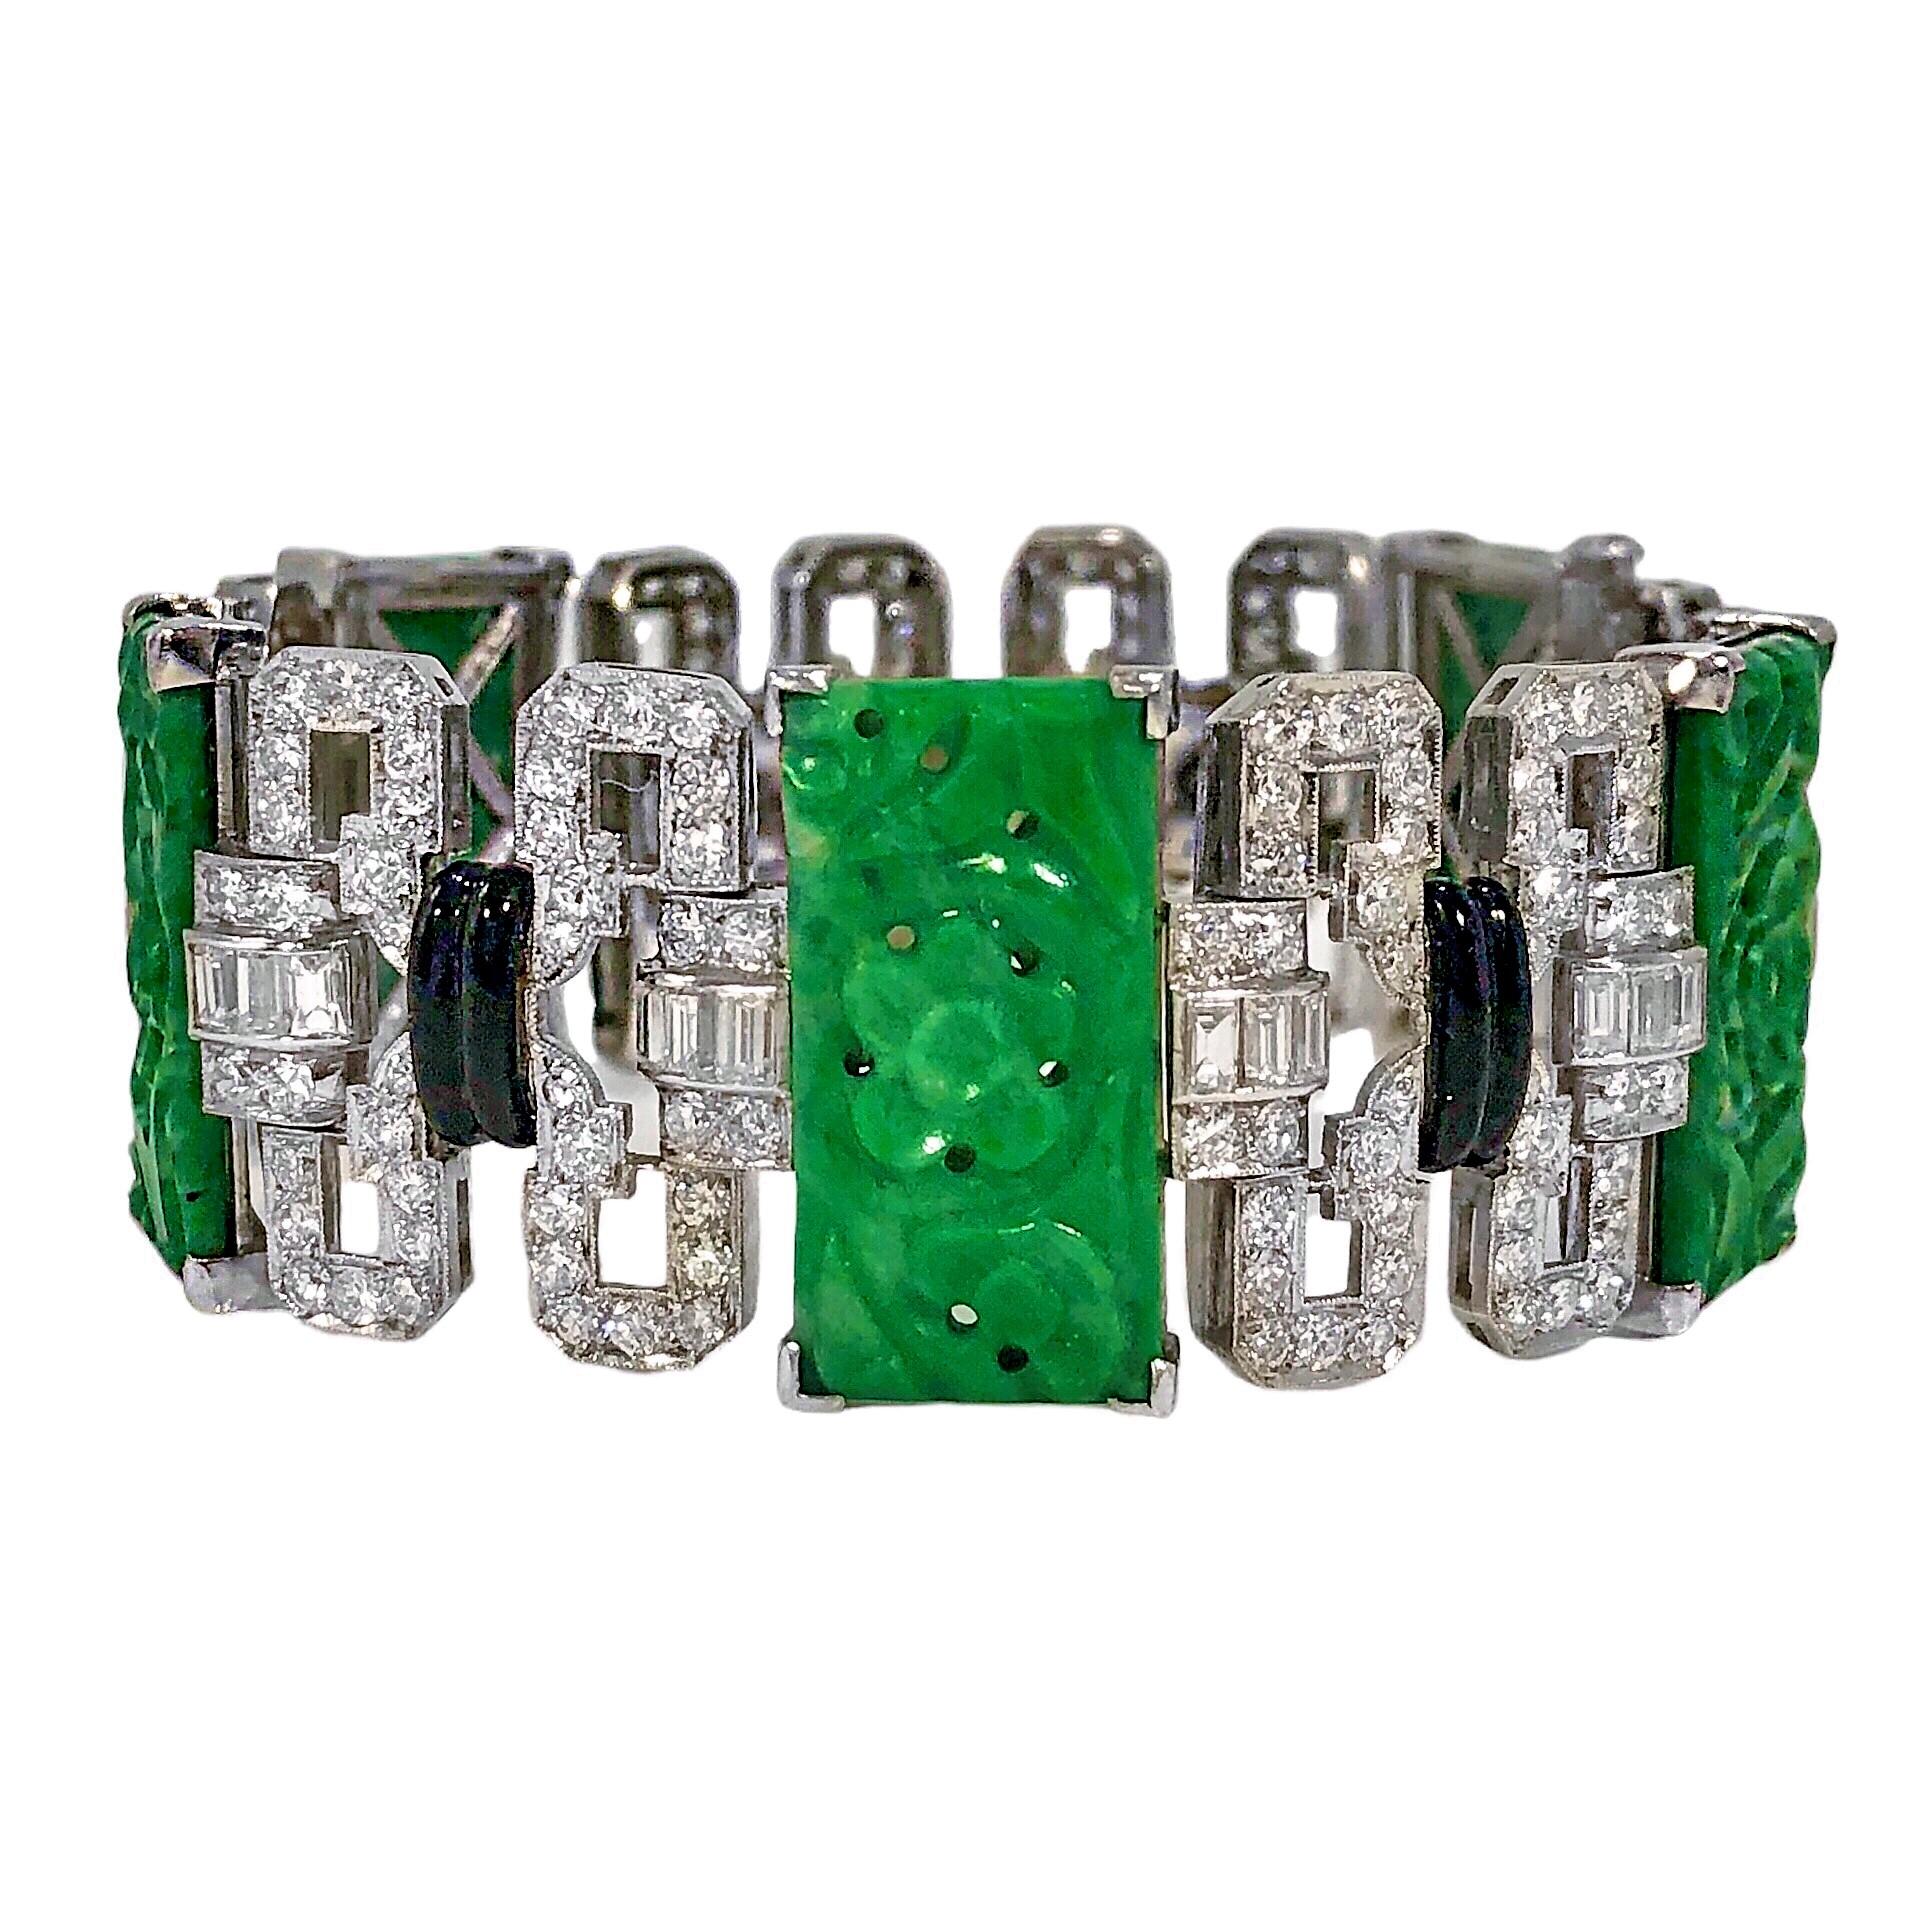 This original Art-Deco period platinum bracelet features five carved and pierced Jadeite Jade panels separated by diamond links that are punctuated with black enamel stations. The reverse side of each jade panel is extensively hand engraved. The